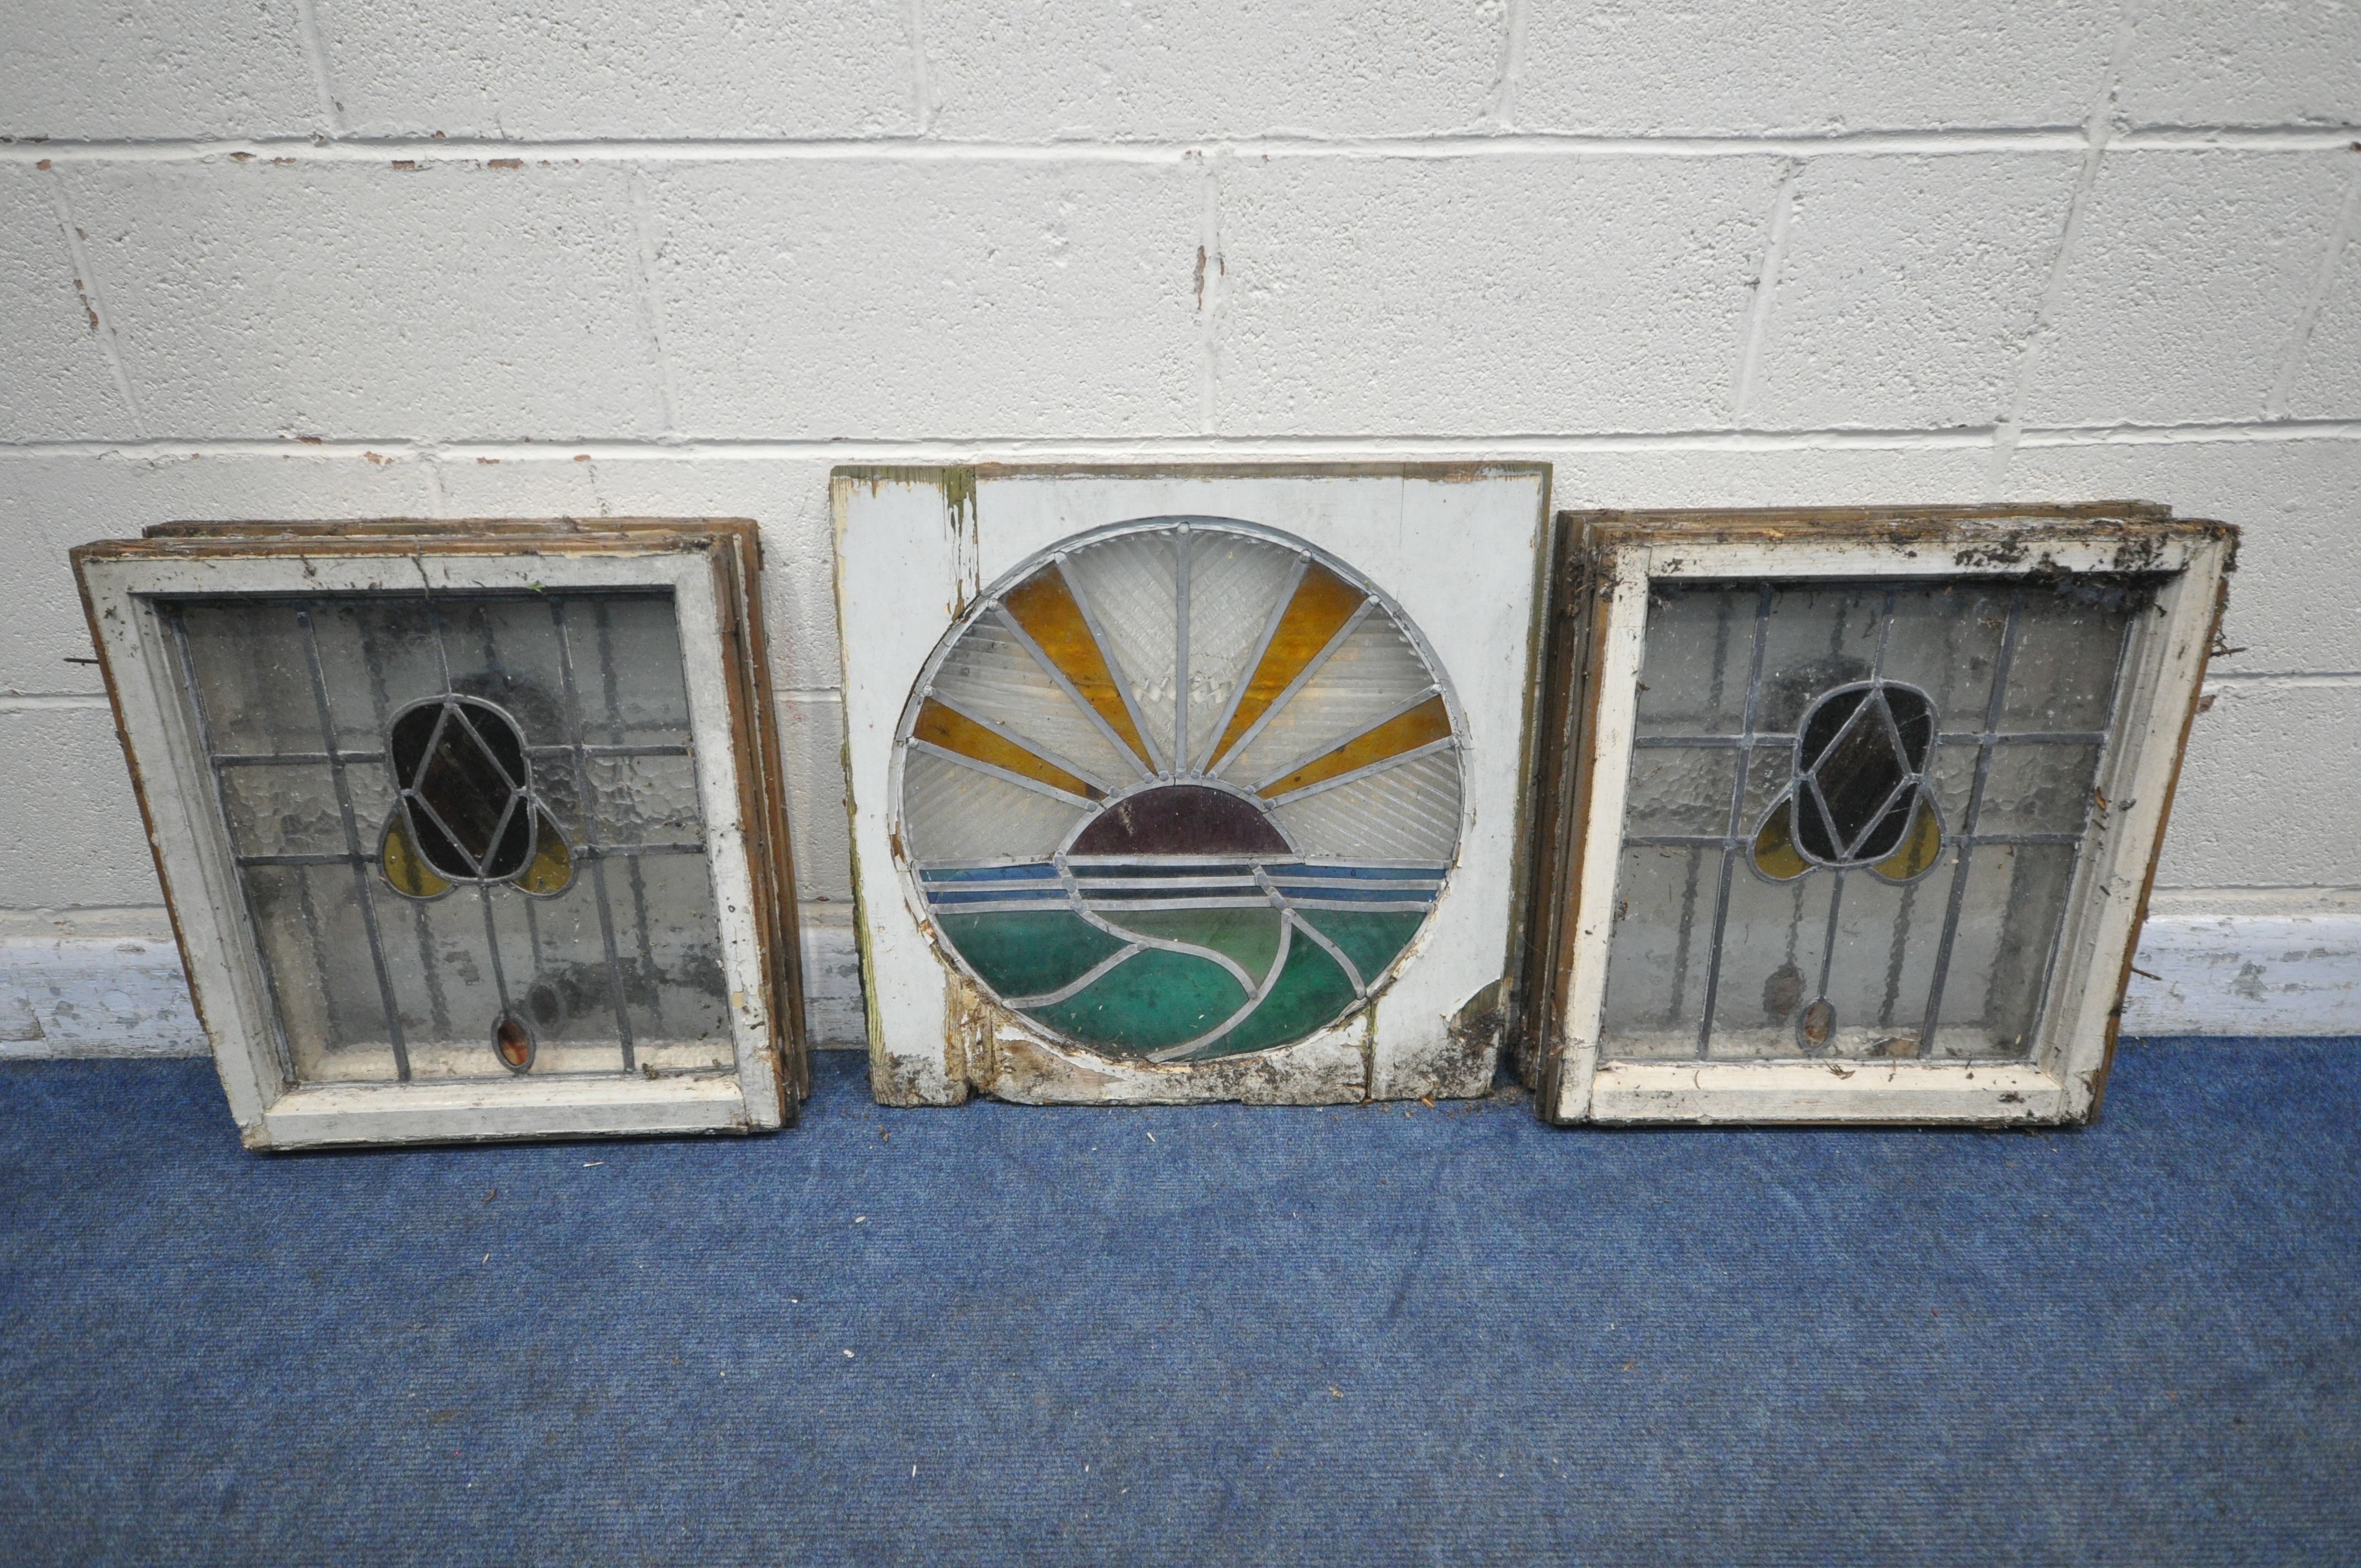 FOUR MATCHING LEAD GLAZED STAINED GLASS WINDOWS, frame size 50cm x 55cm, along with a circular